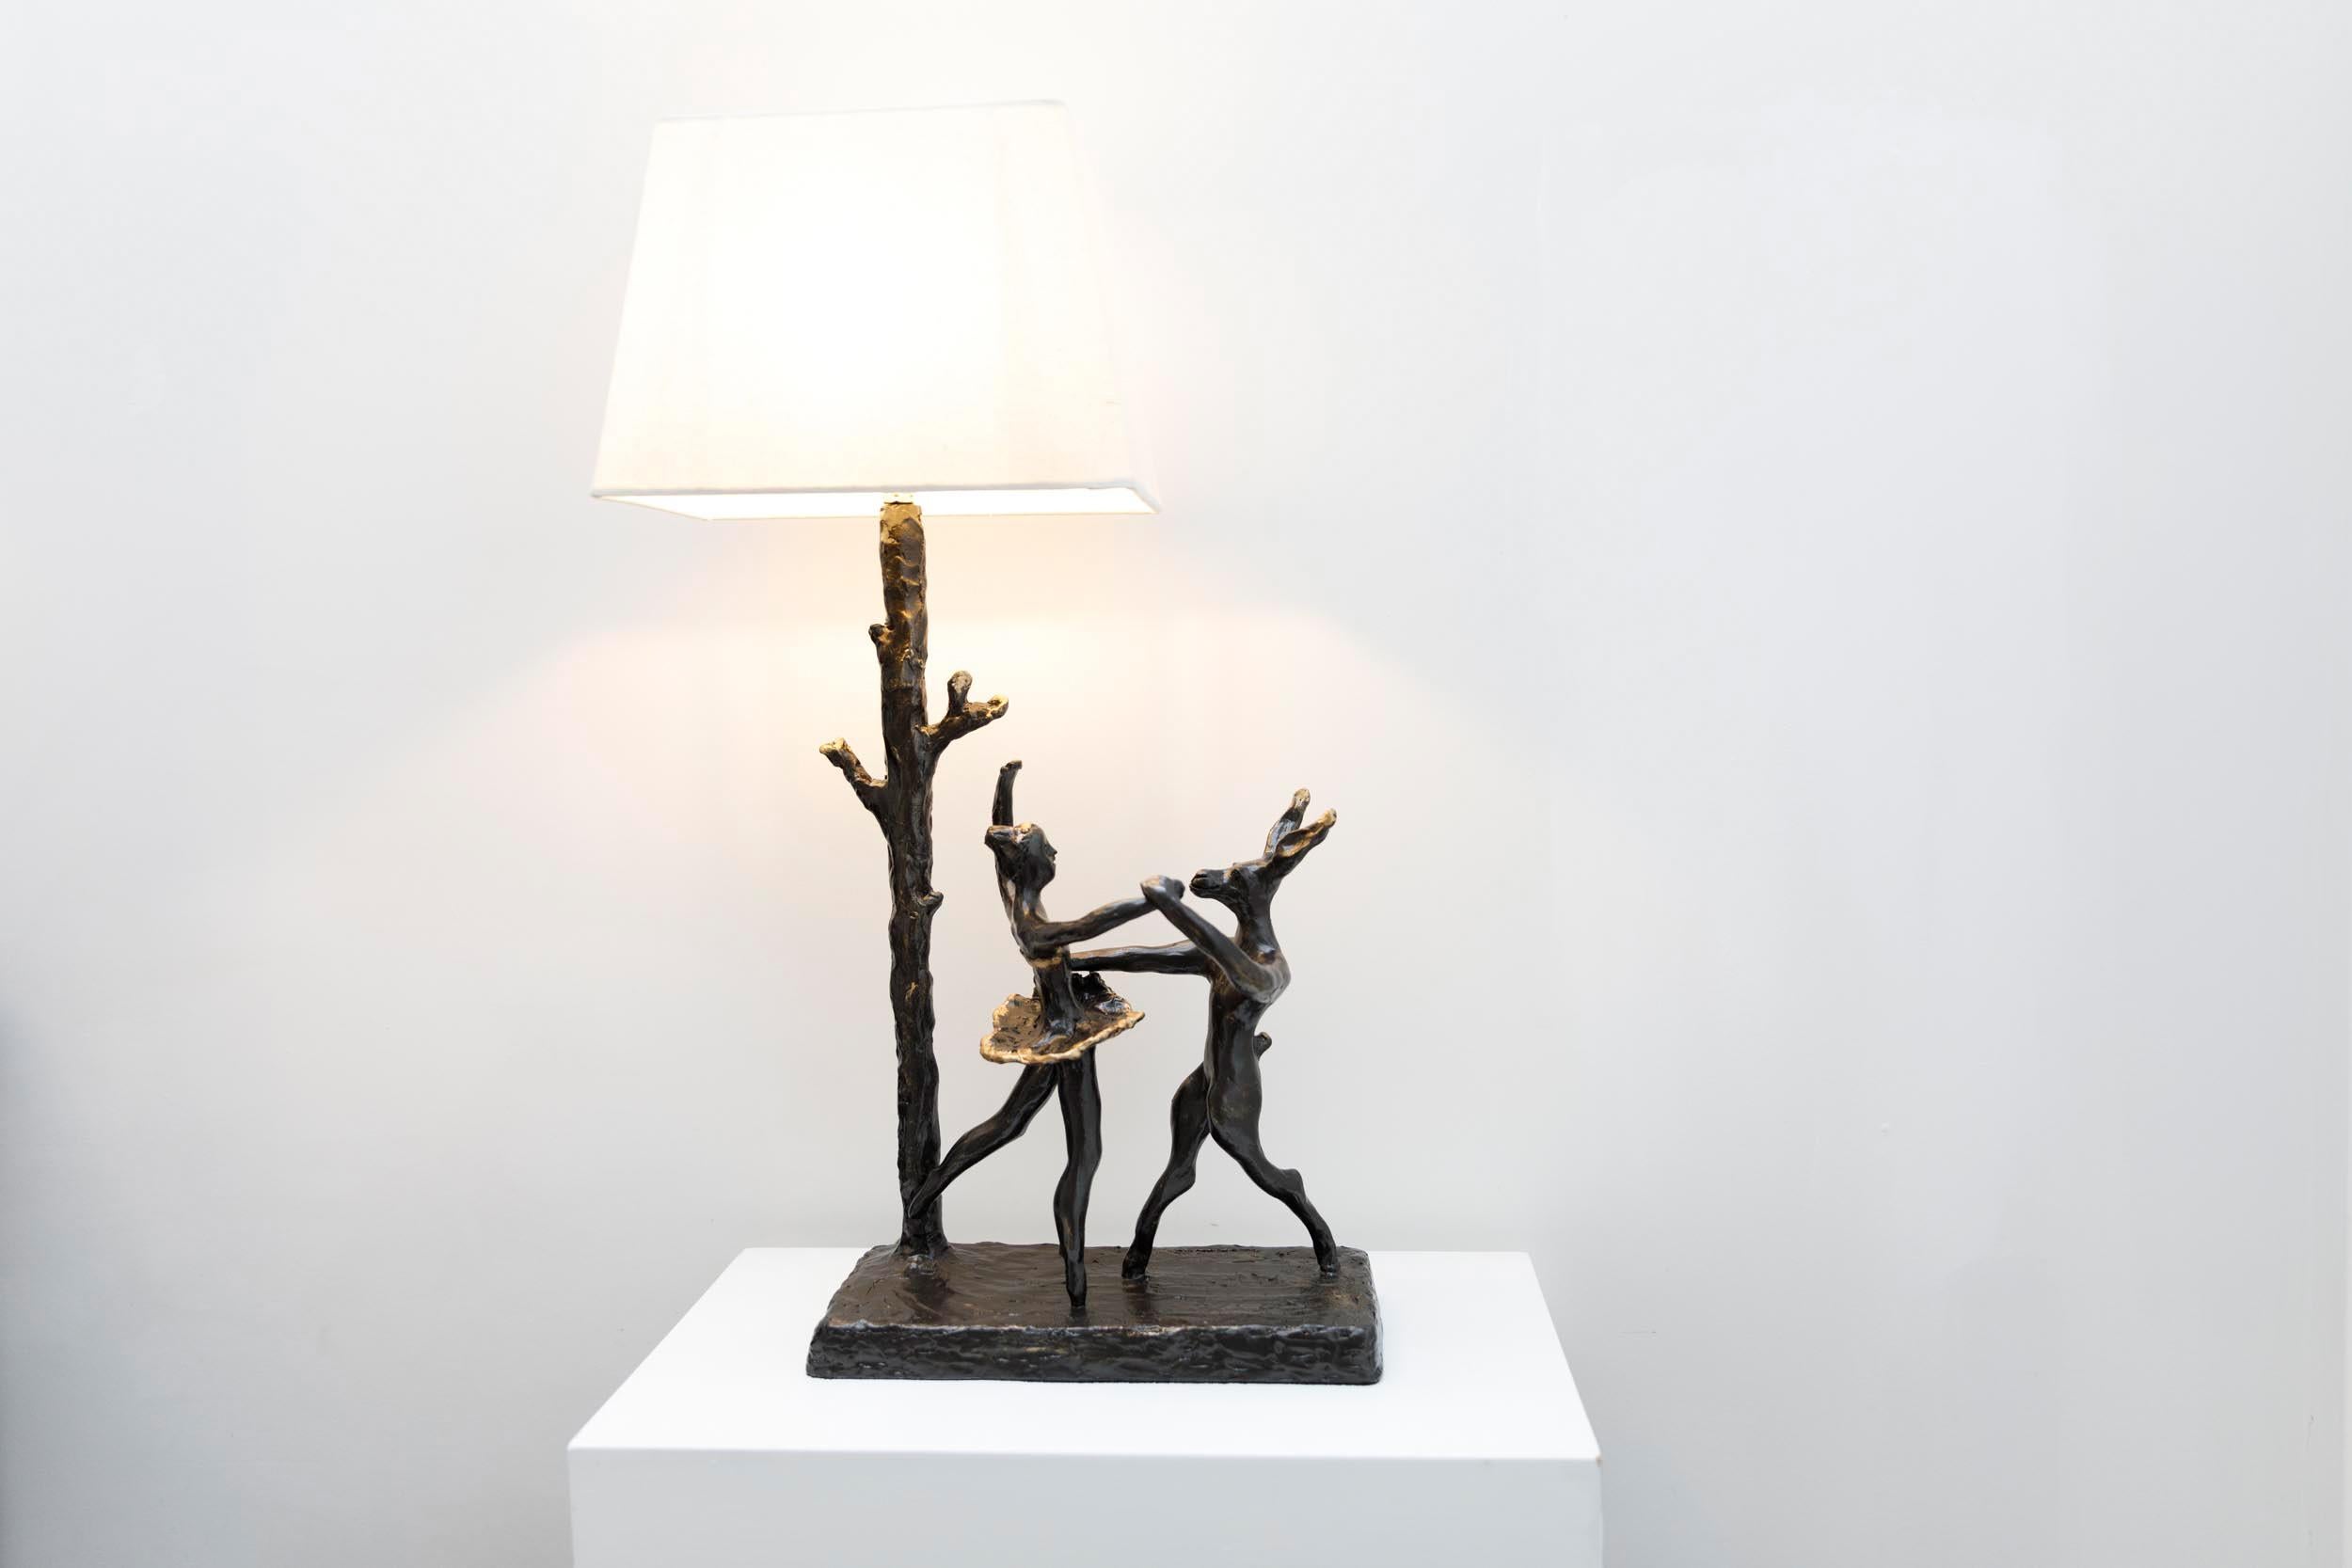 Hare & Ballerina sculptural table lamp, hand crafted, moulded and cast in a mix of resin and bronze. A whimsical lamp of a hare dancing alongside a ballerina by the tree trunk. A charming piece of functional art work creating luminous corner and